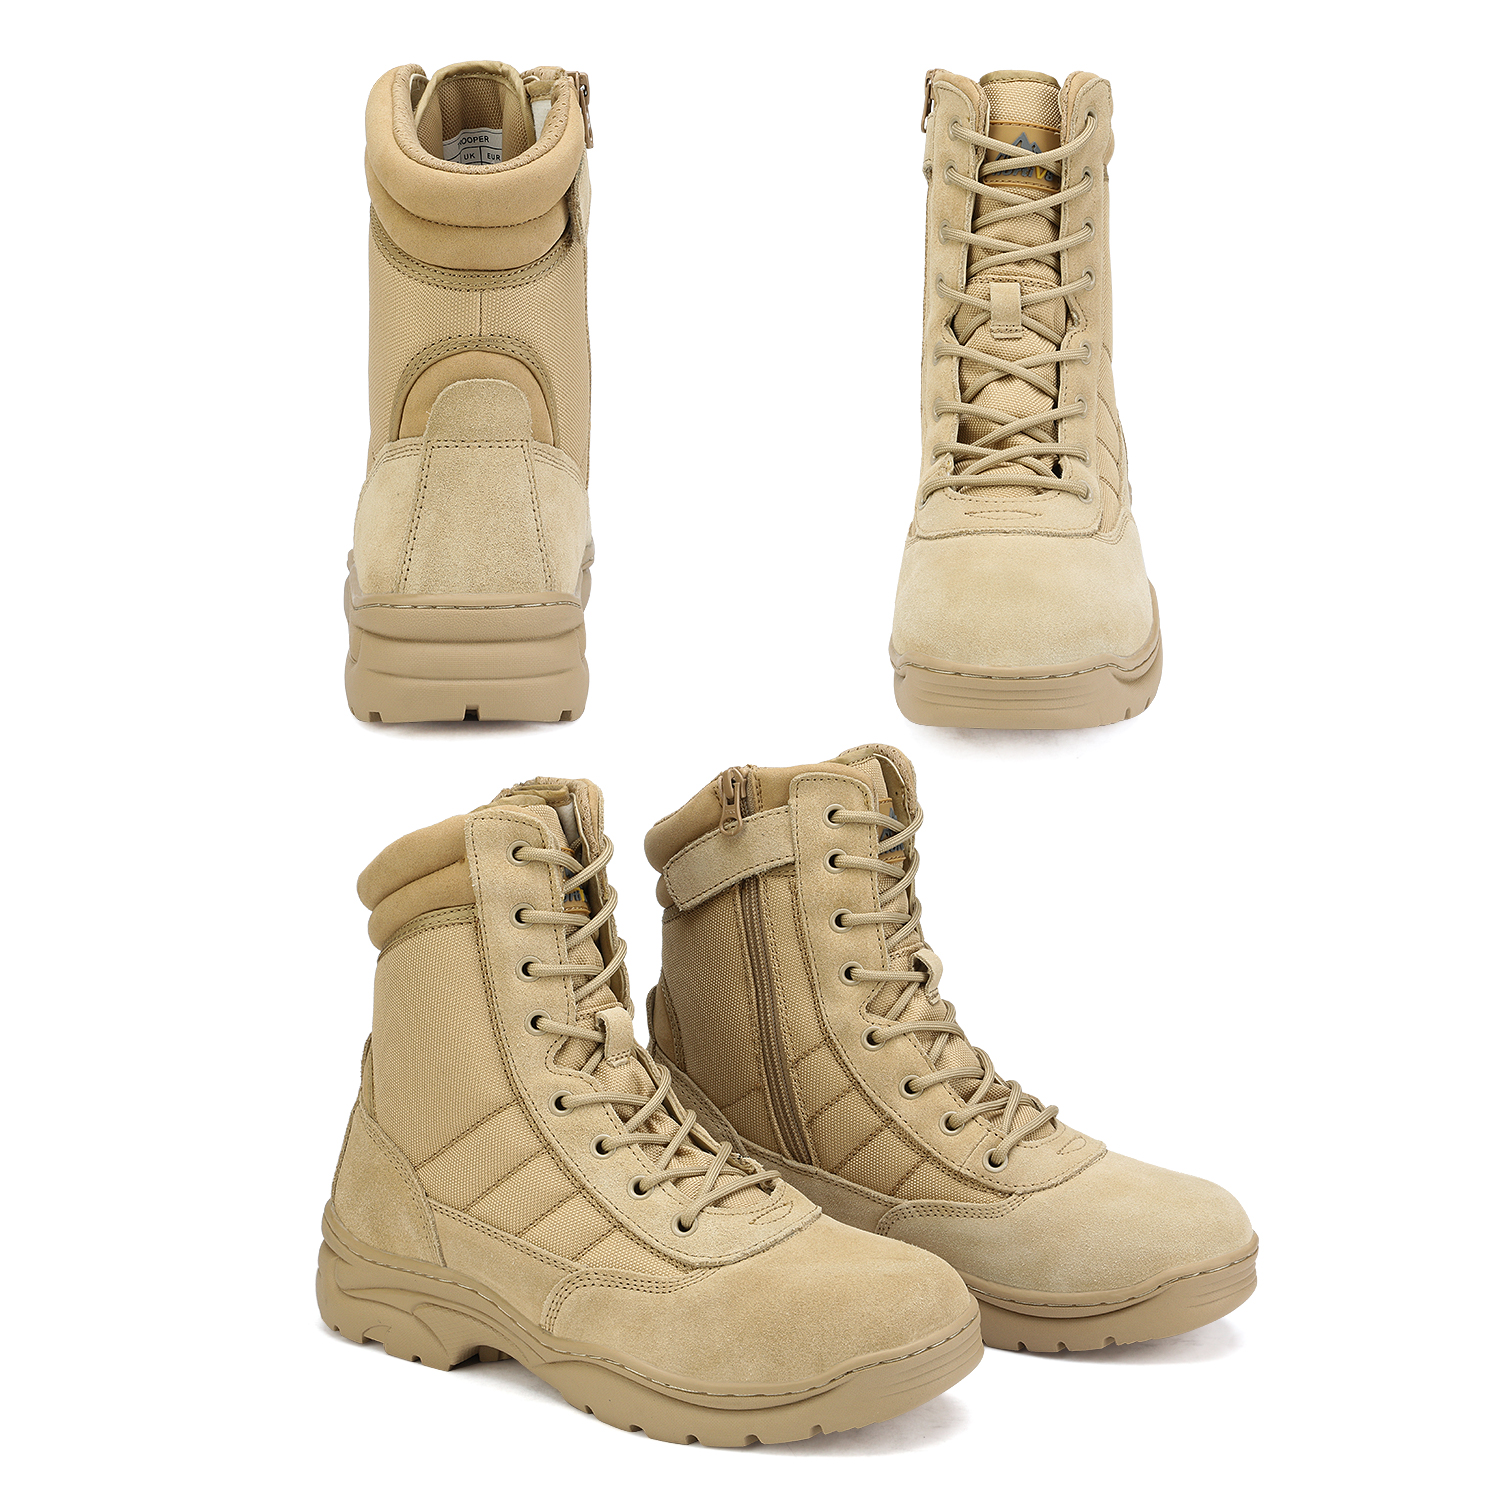 Nortiv 8 Men's Tactical Work Boots Zip Military Leather Motorcycle Combat Boots for Man Trooper Sand Size 12 - image 5 of 6